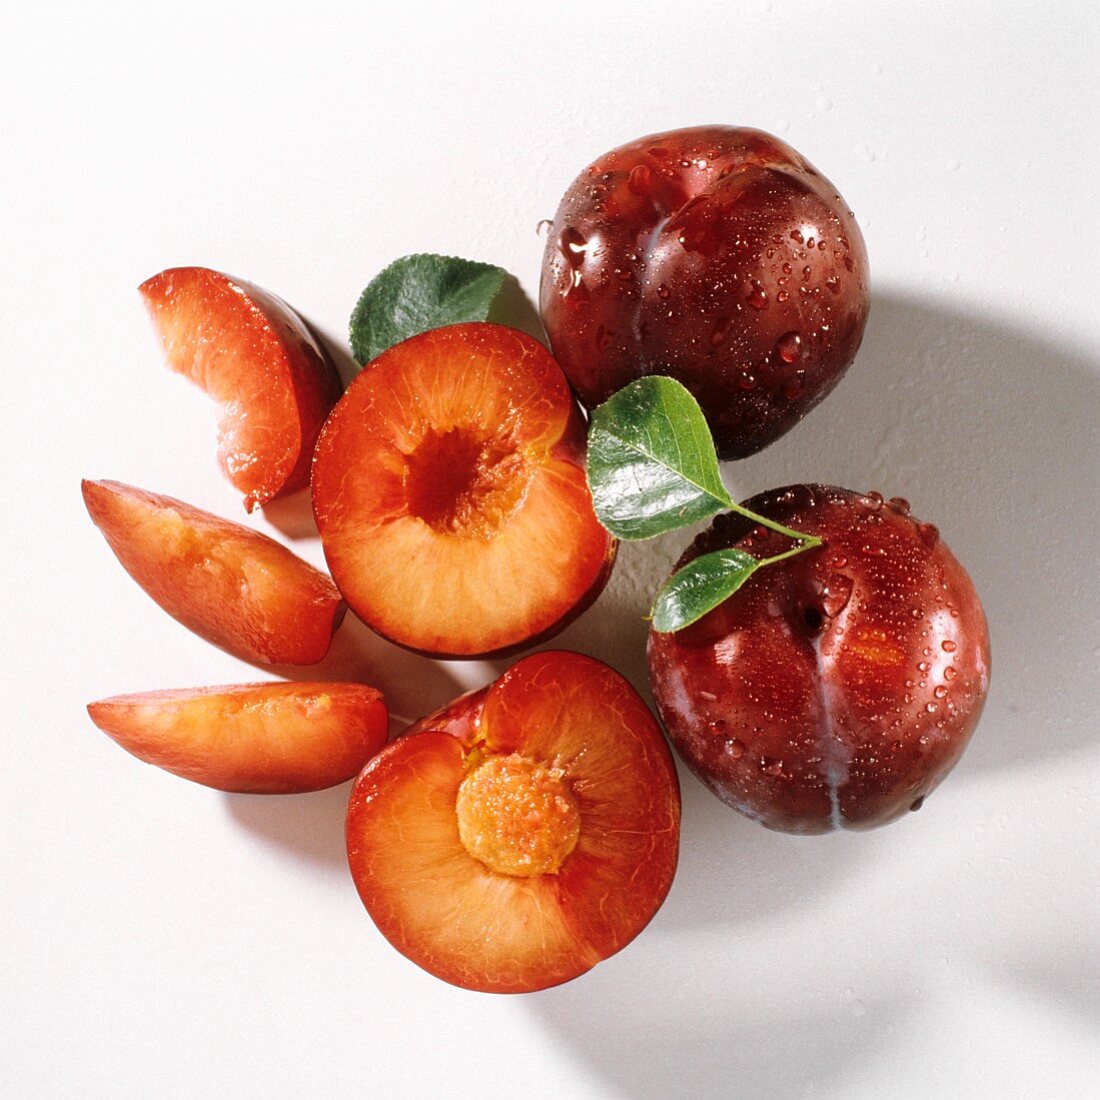 Two Whole Plums; A Halved Plum; Plum Slices